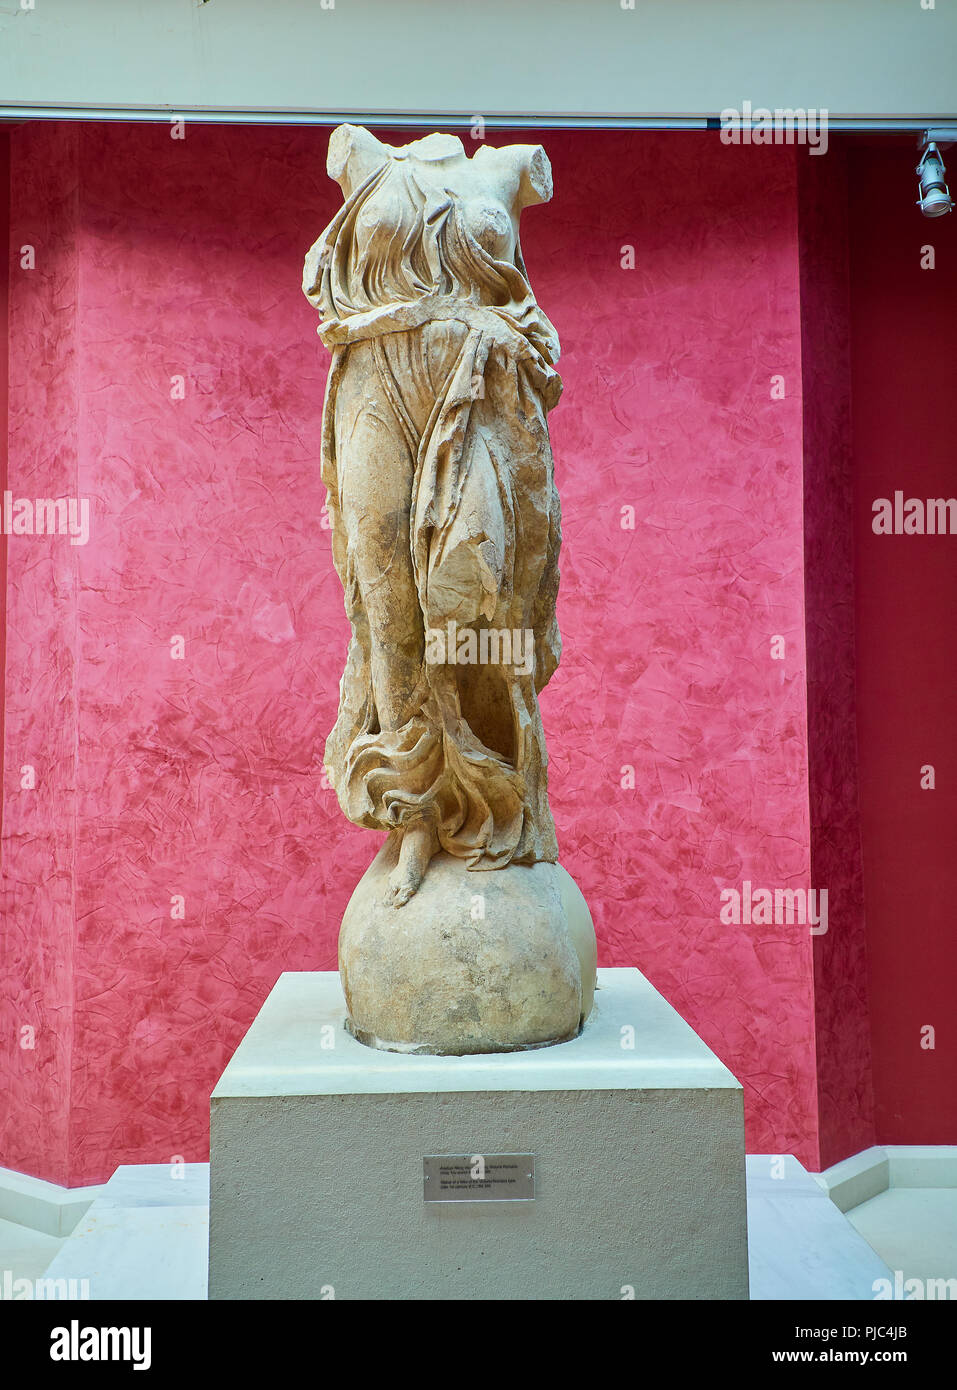 Athens, Greece - July 2, 2018. Sculpture of Nike, Greek goddess of victory,  in the museum at the Hadrian's Library in Athens, Attica region, Greece  Stock Photo - Alamy